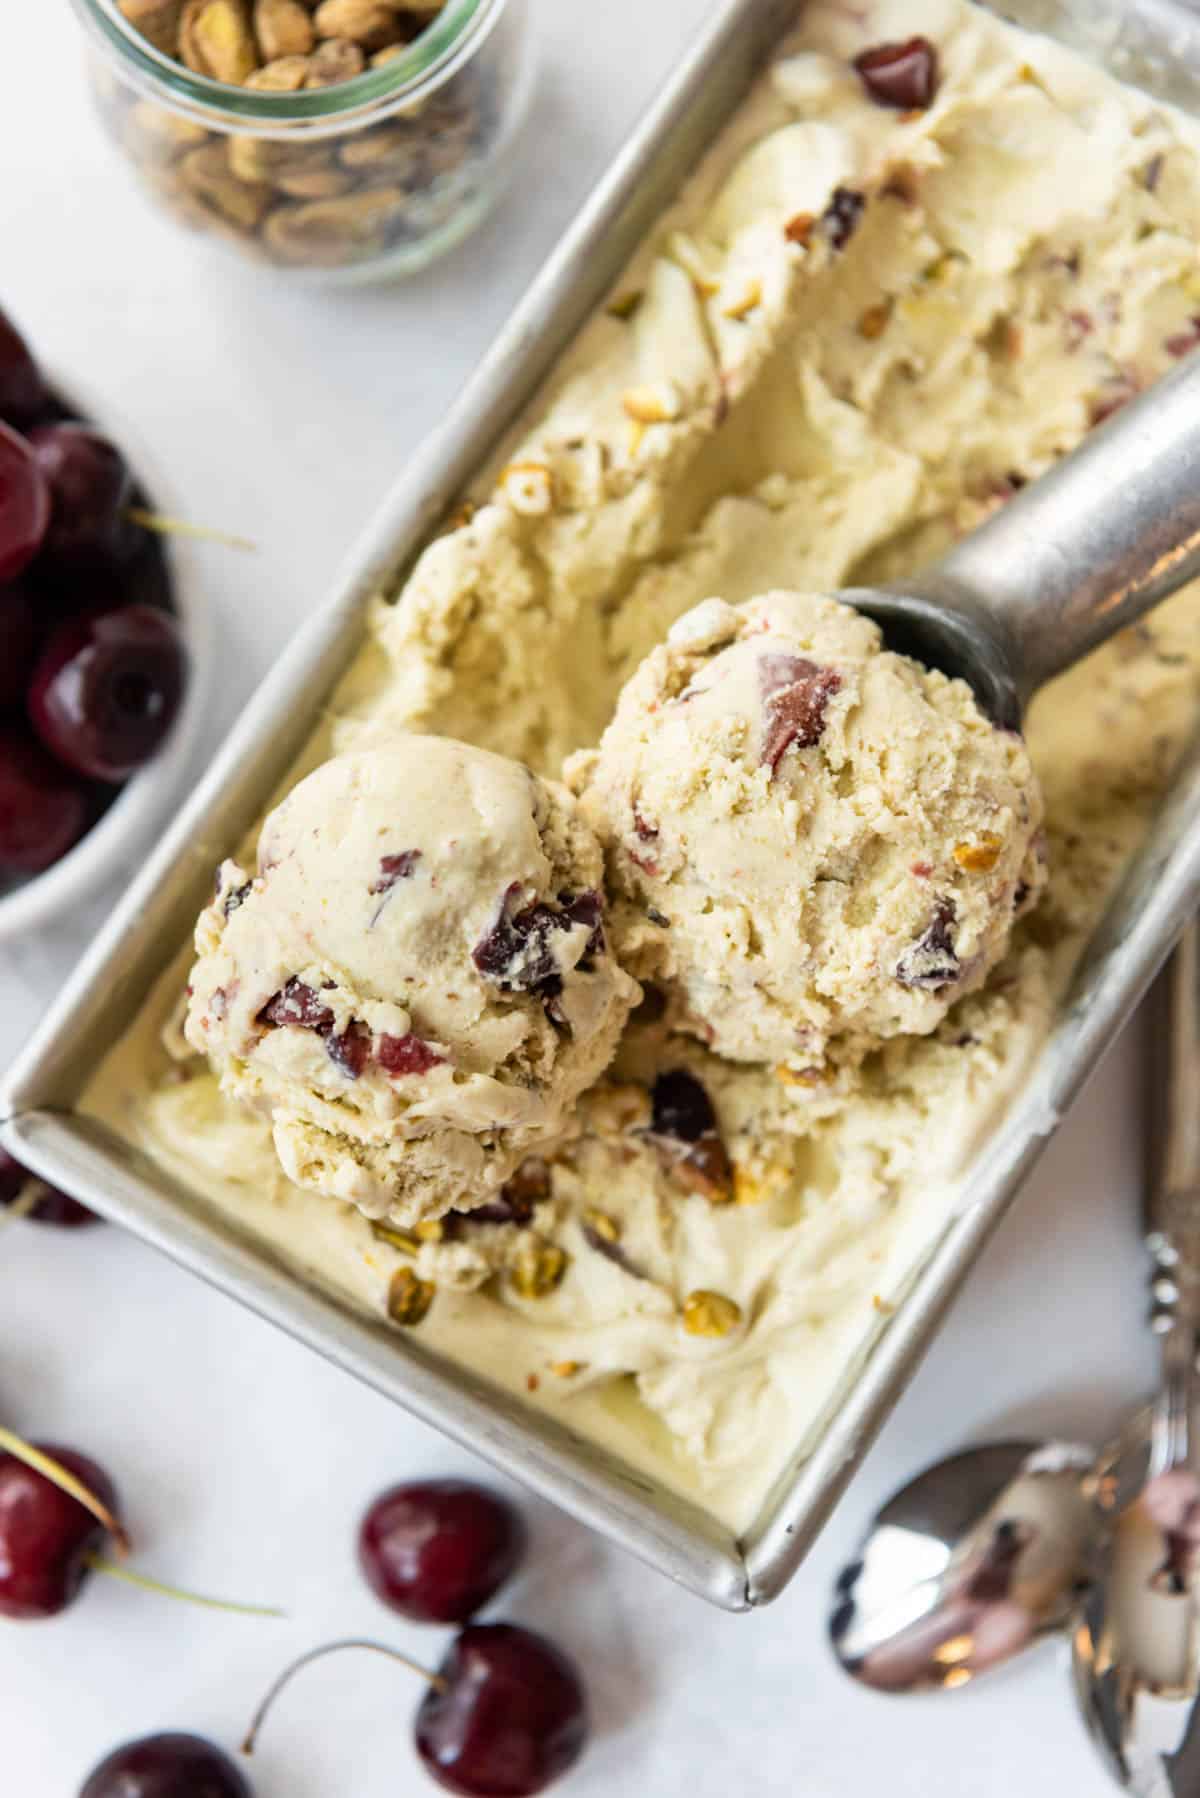 An overhead image of scoops of cherry pistachio ice cream on top of the rest of the ice cream in a pan.